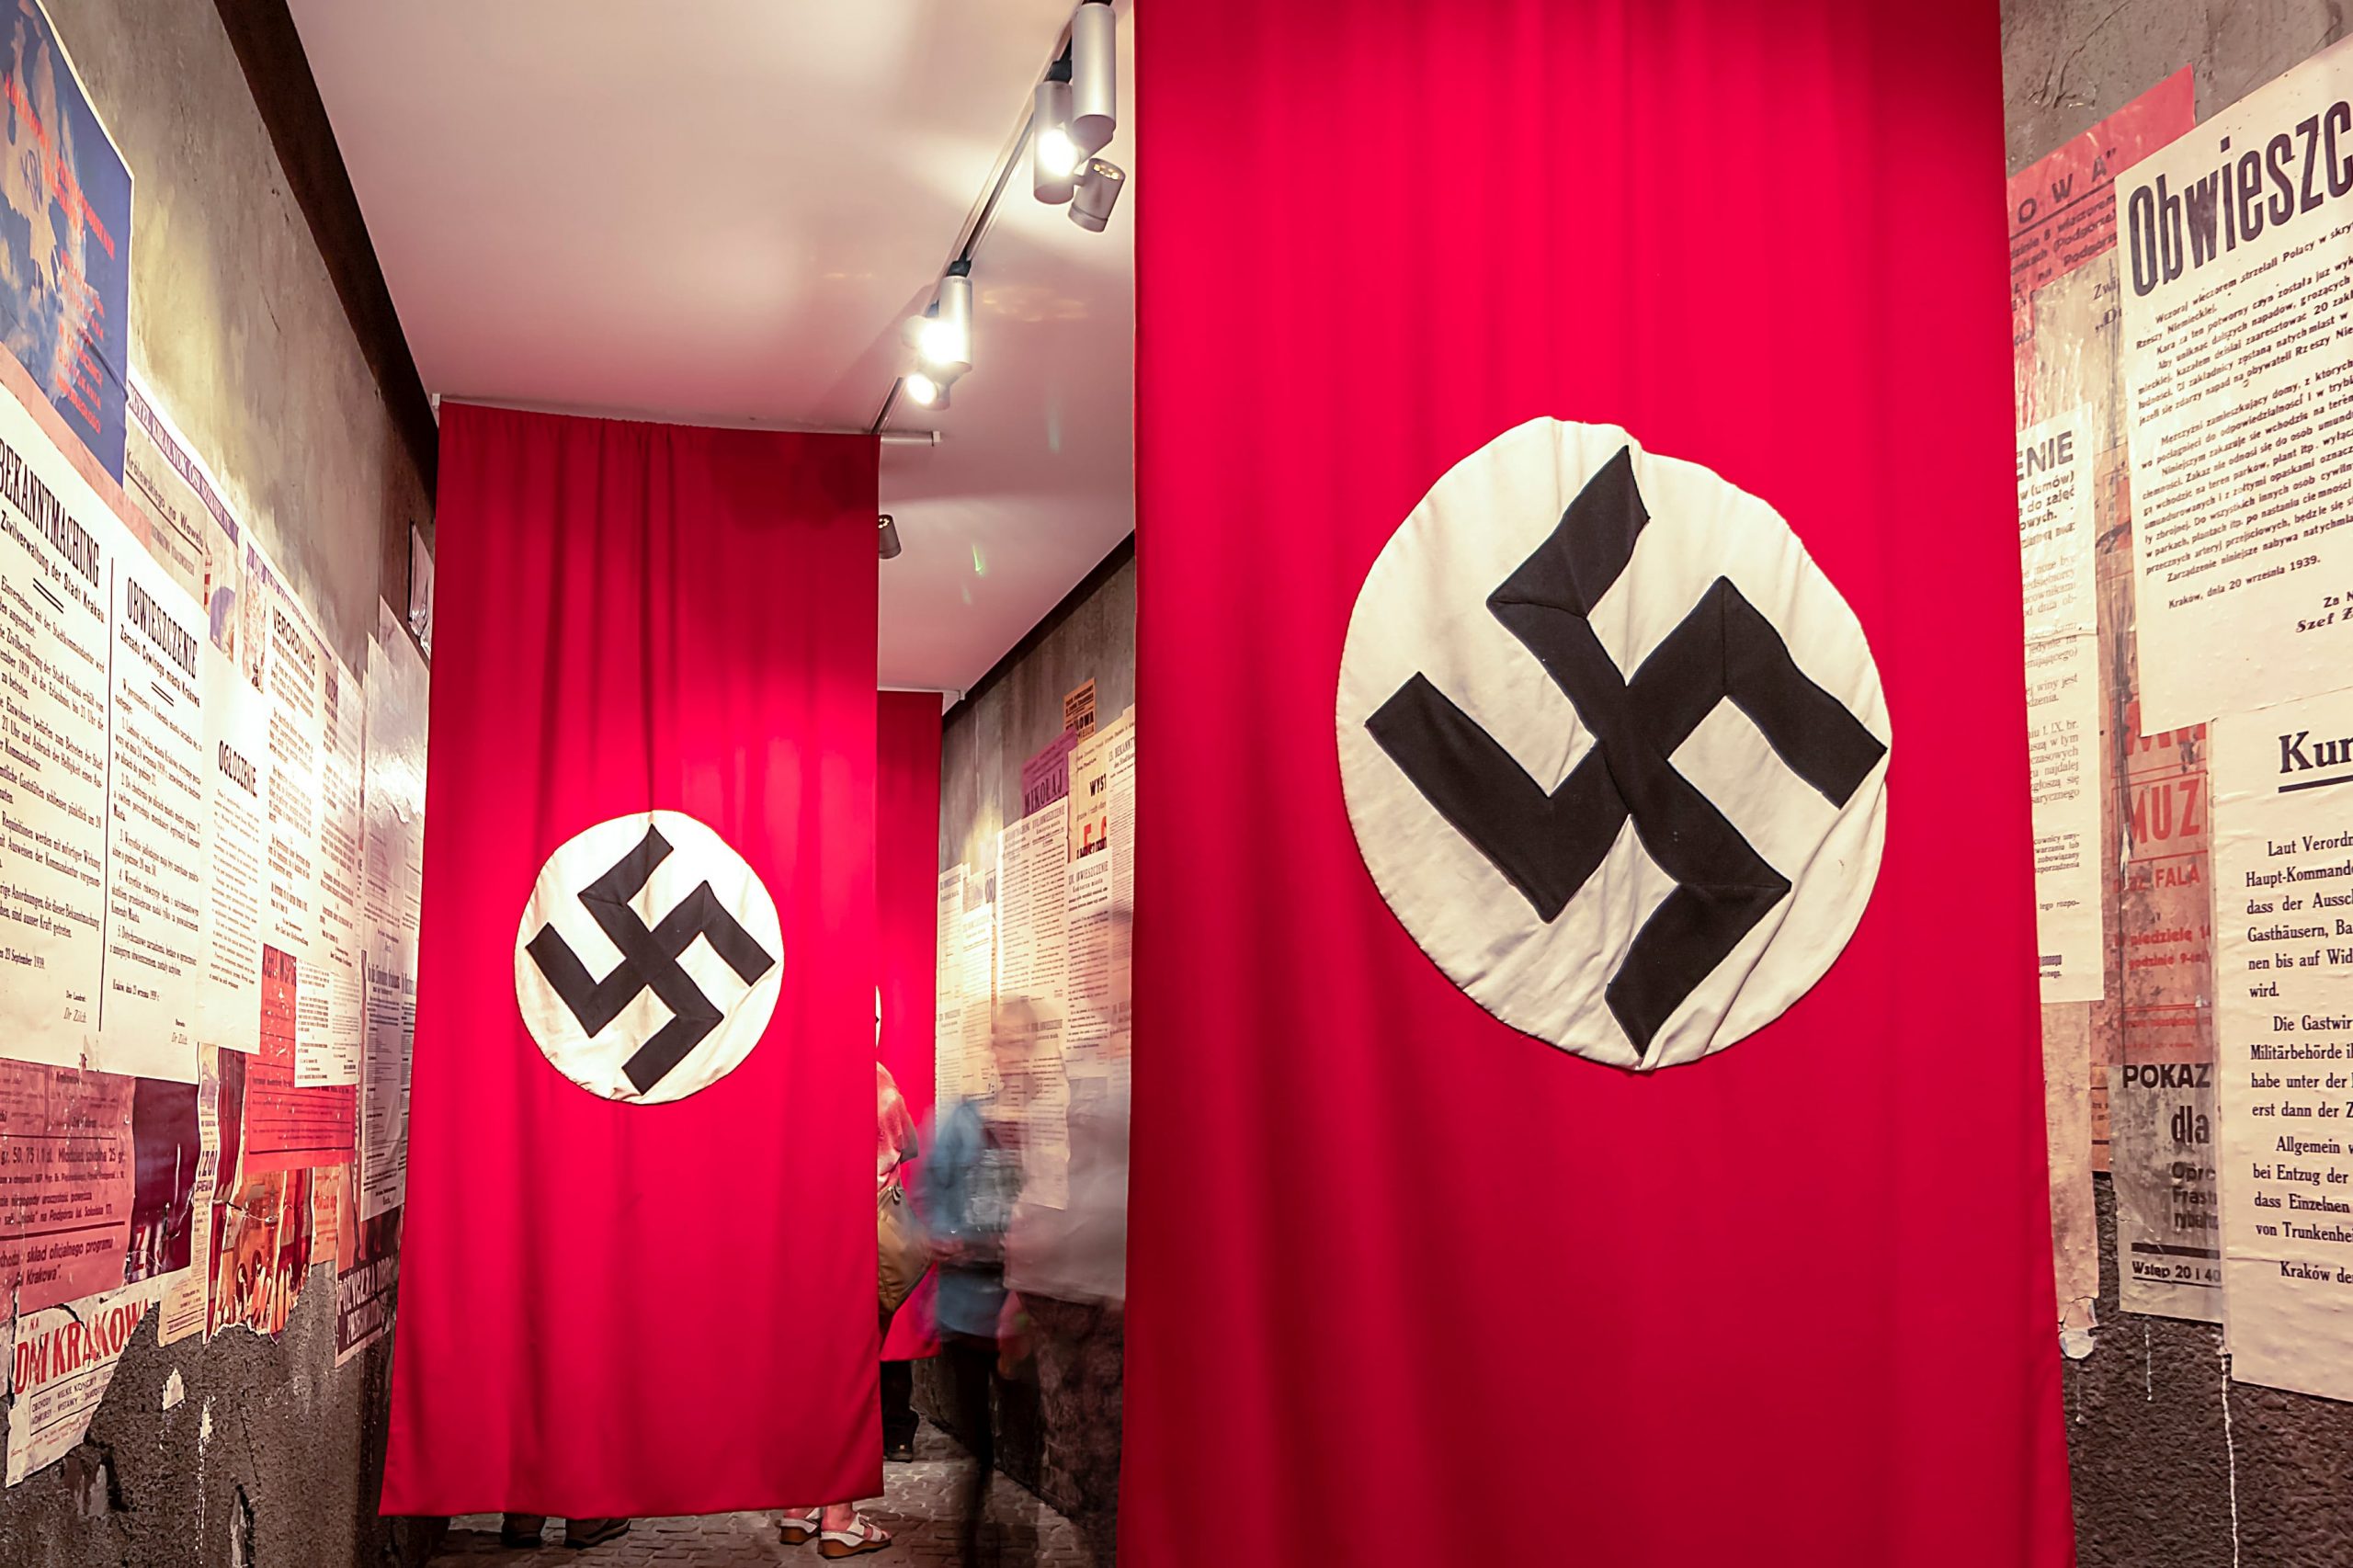 Is it Illegal to Publicly Display Nazi Symbols?